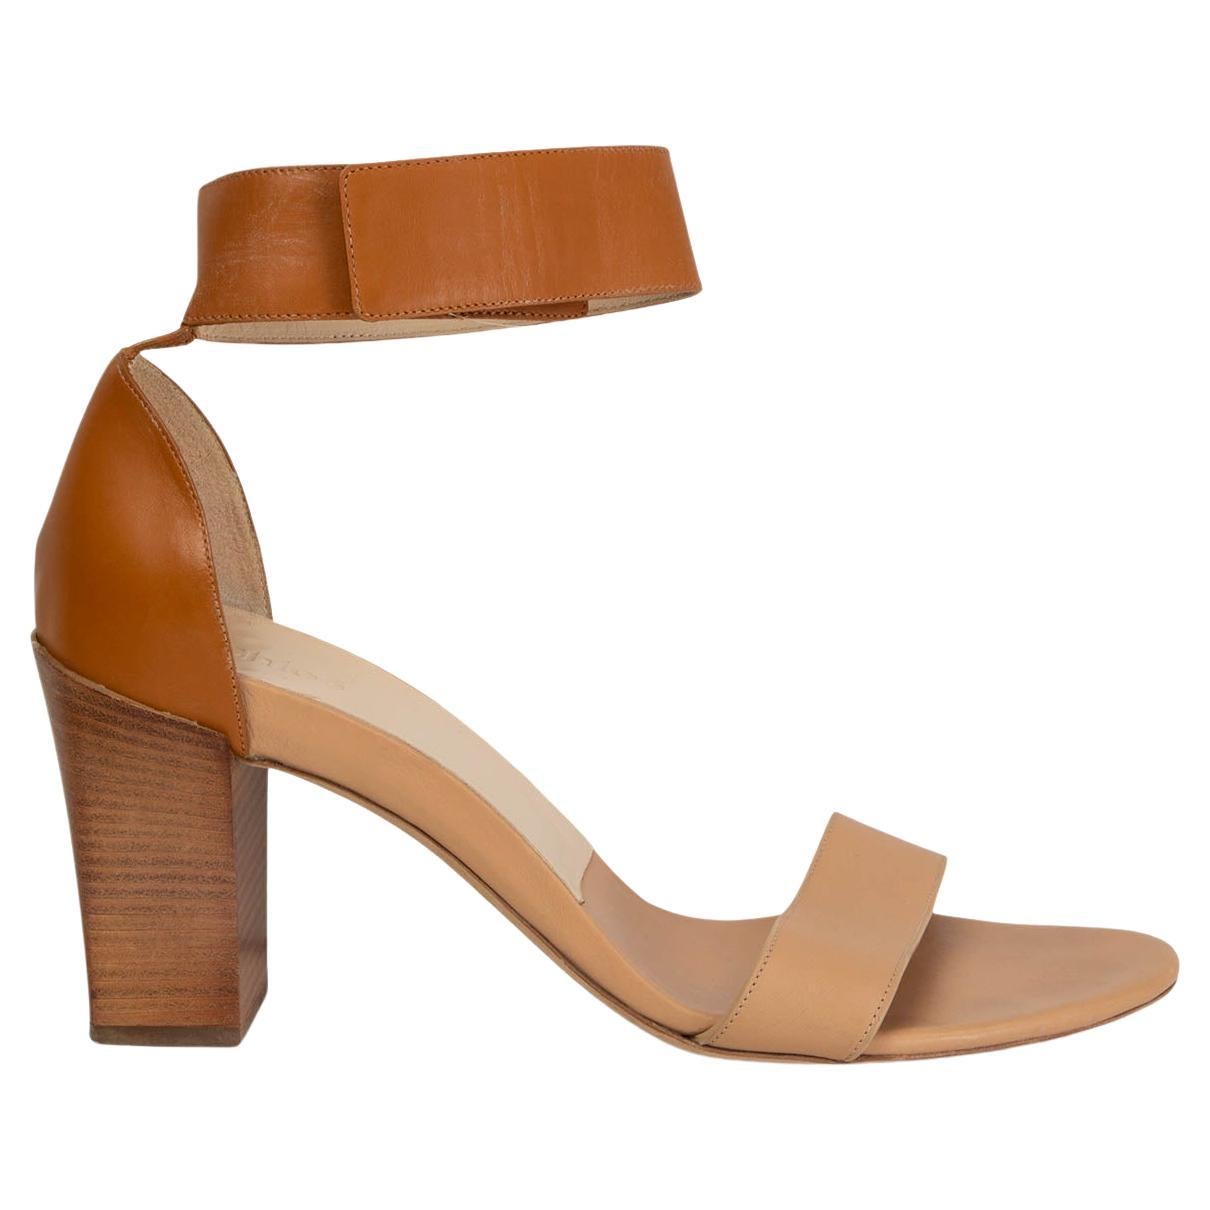 CHLOE beige & nude TWO TONE ANKLE STRAP Sandals Shoes 42 SEAWATER